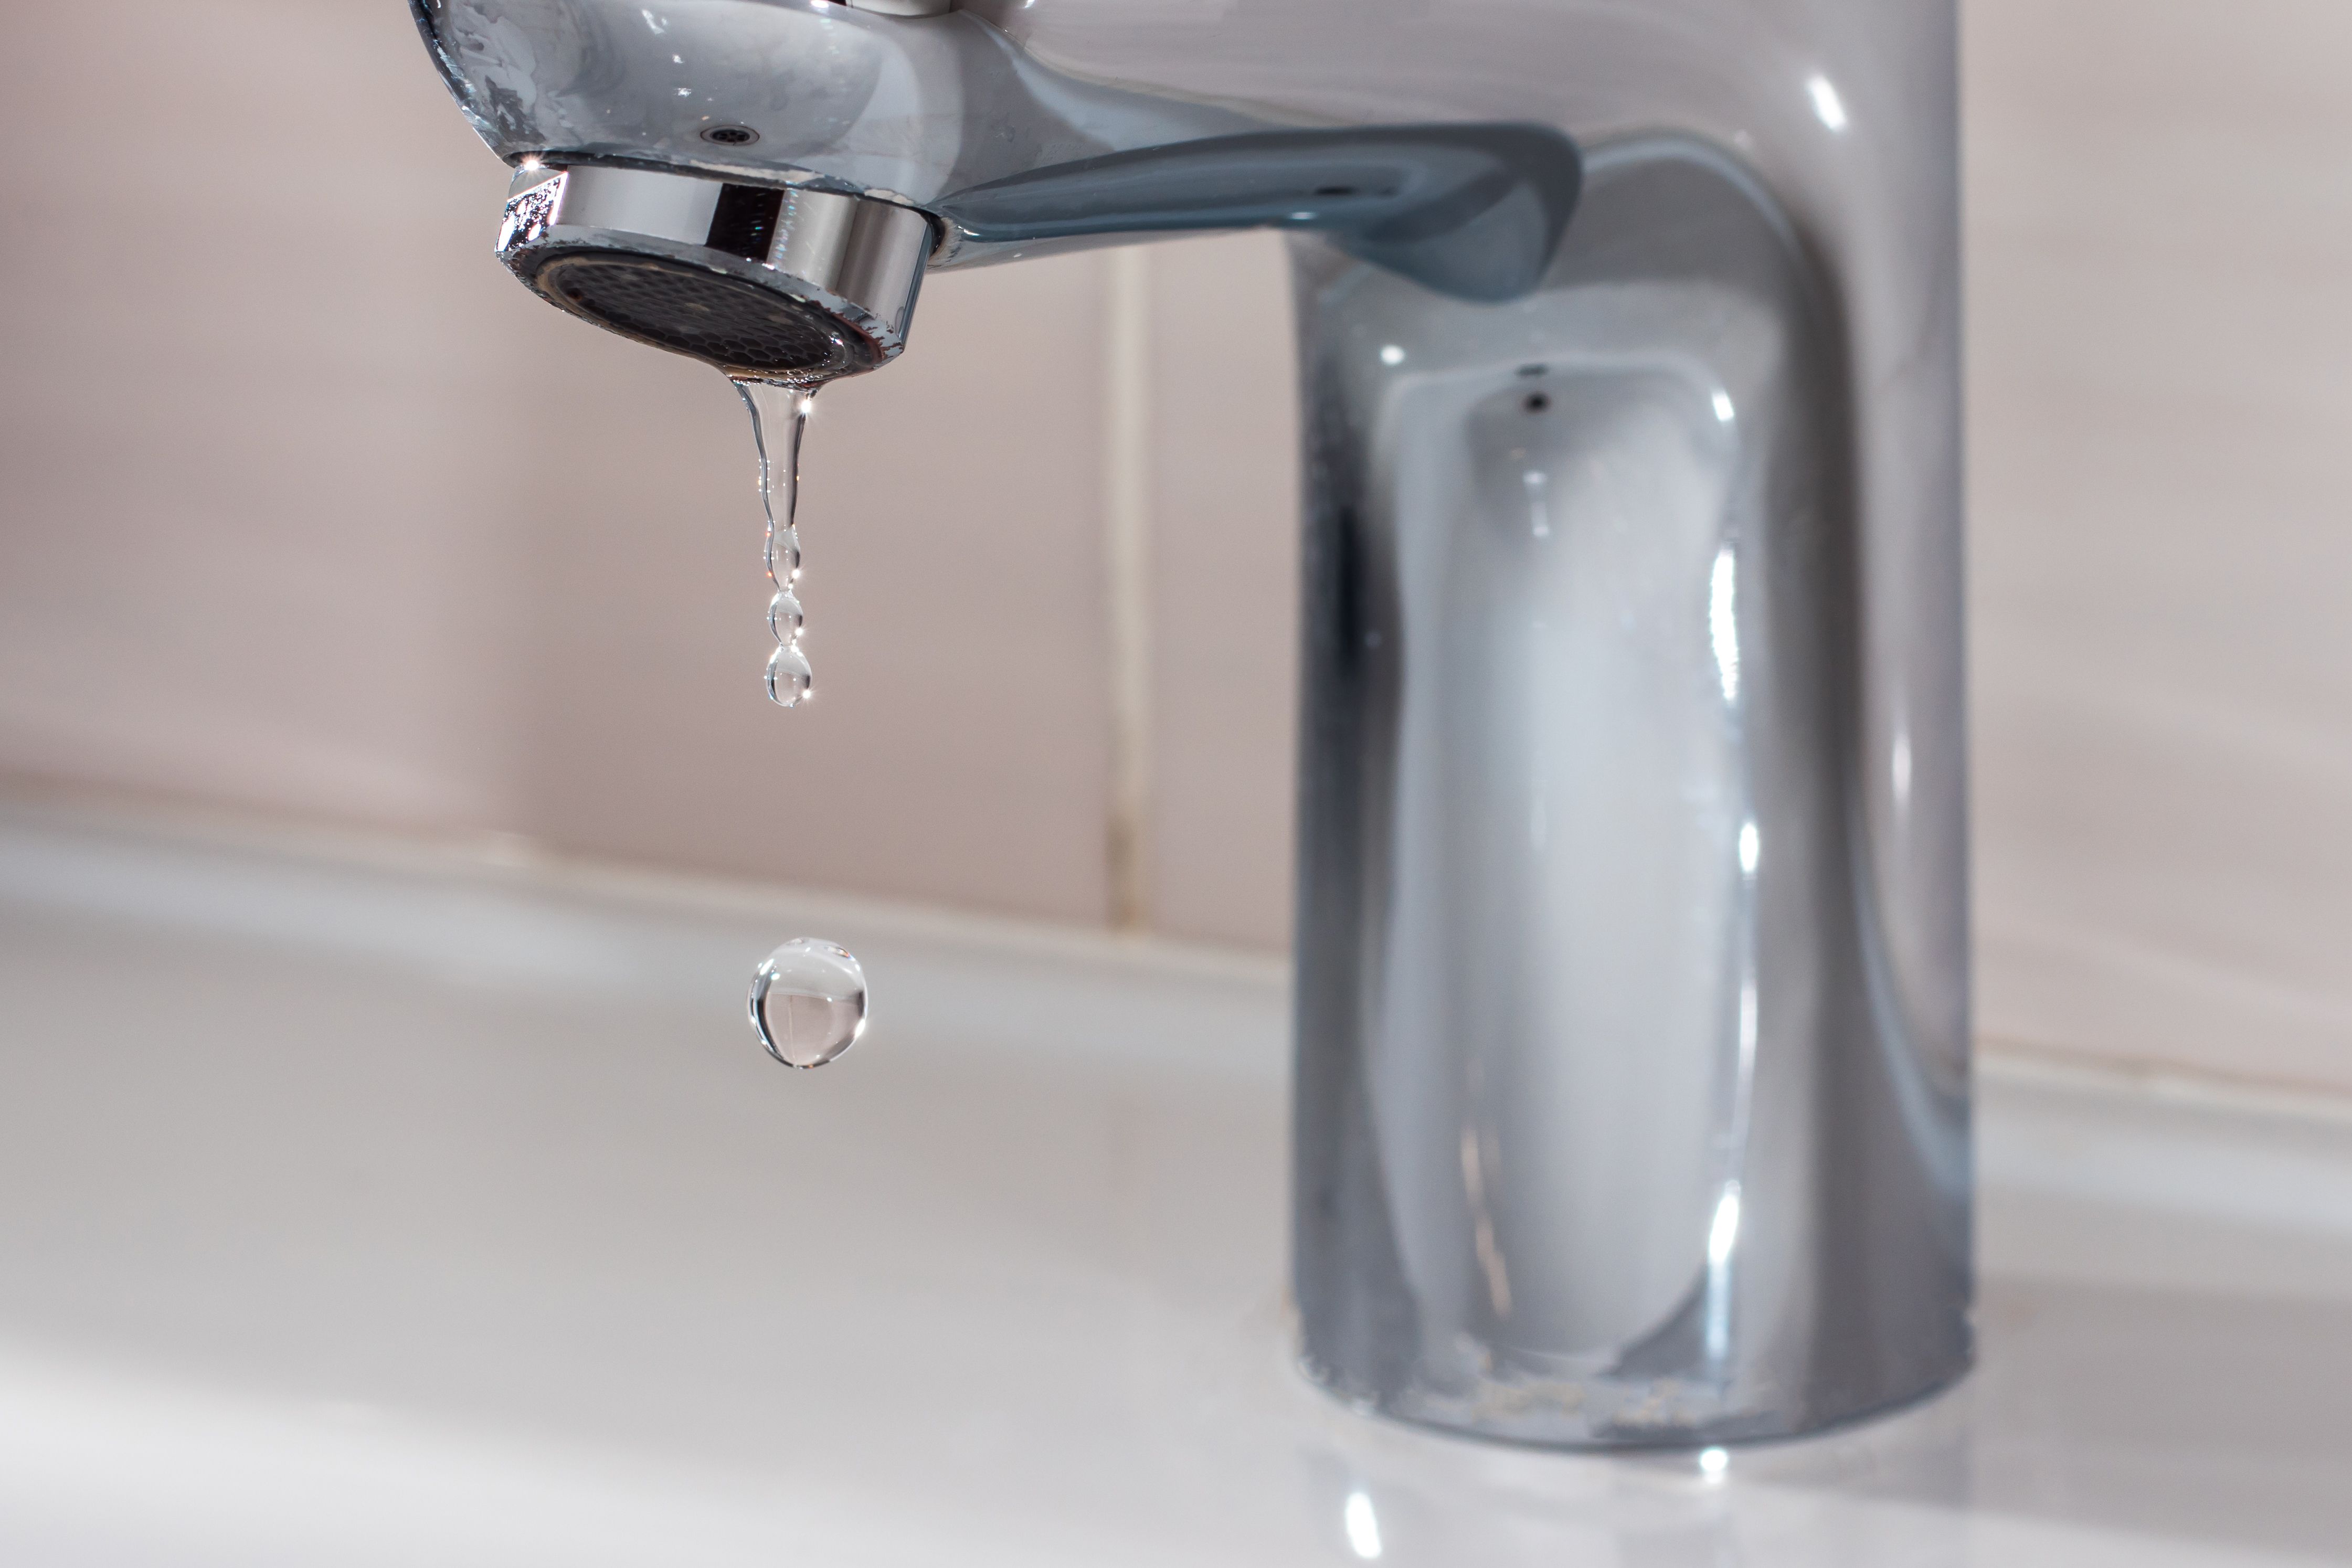 How to Fix a Leaky Faucet - 29 Easy Steps to Fix a Faucet